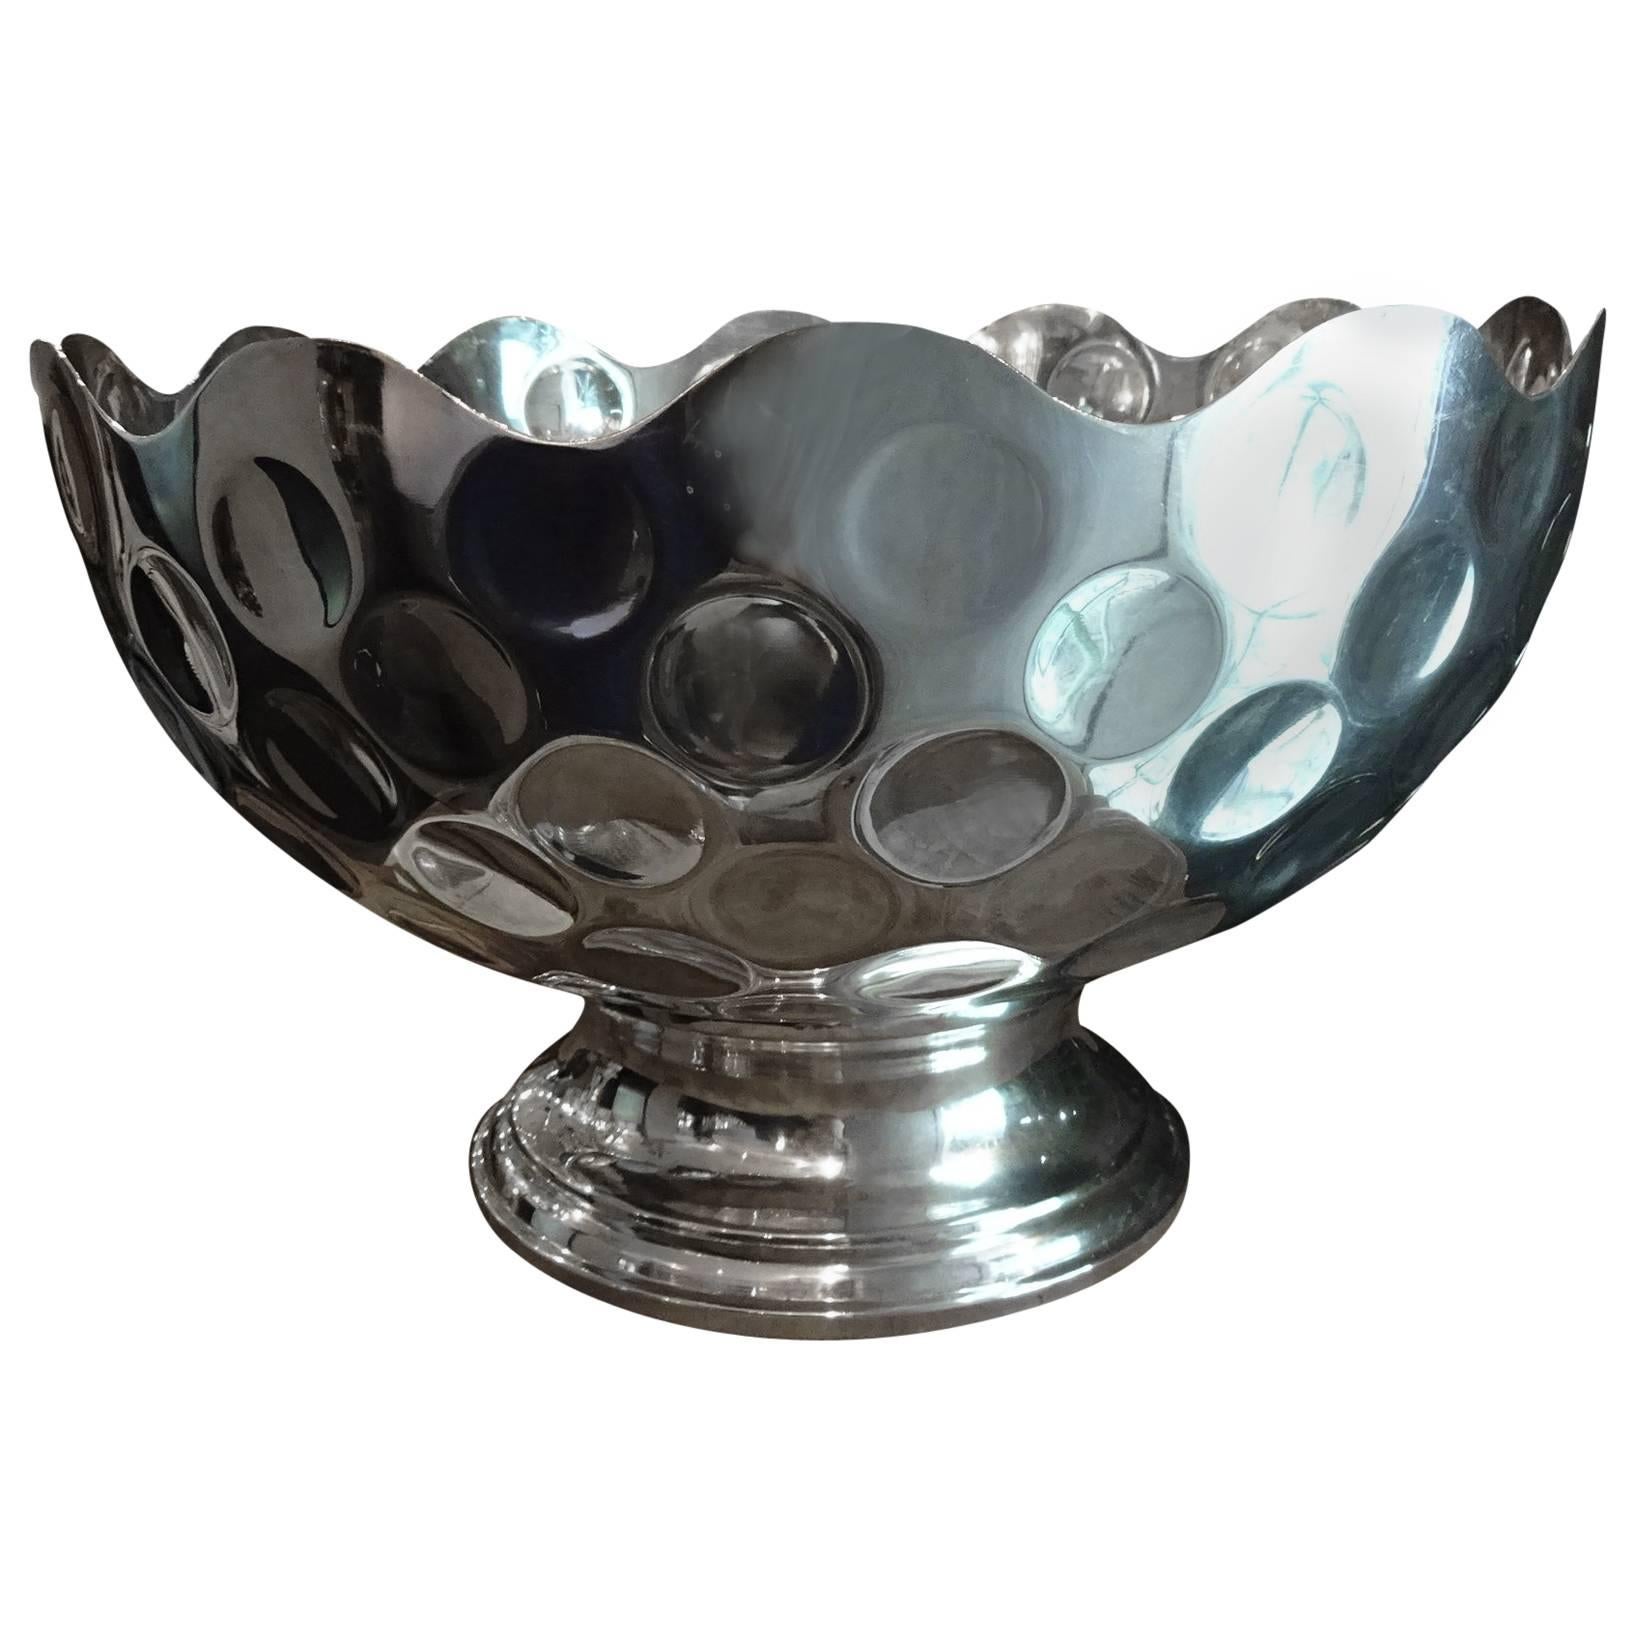 Mid-20th Century Silvered French Champagne Cooler Bowl